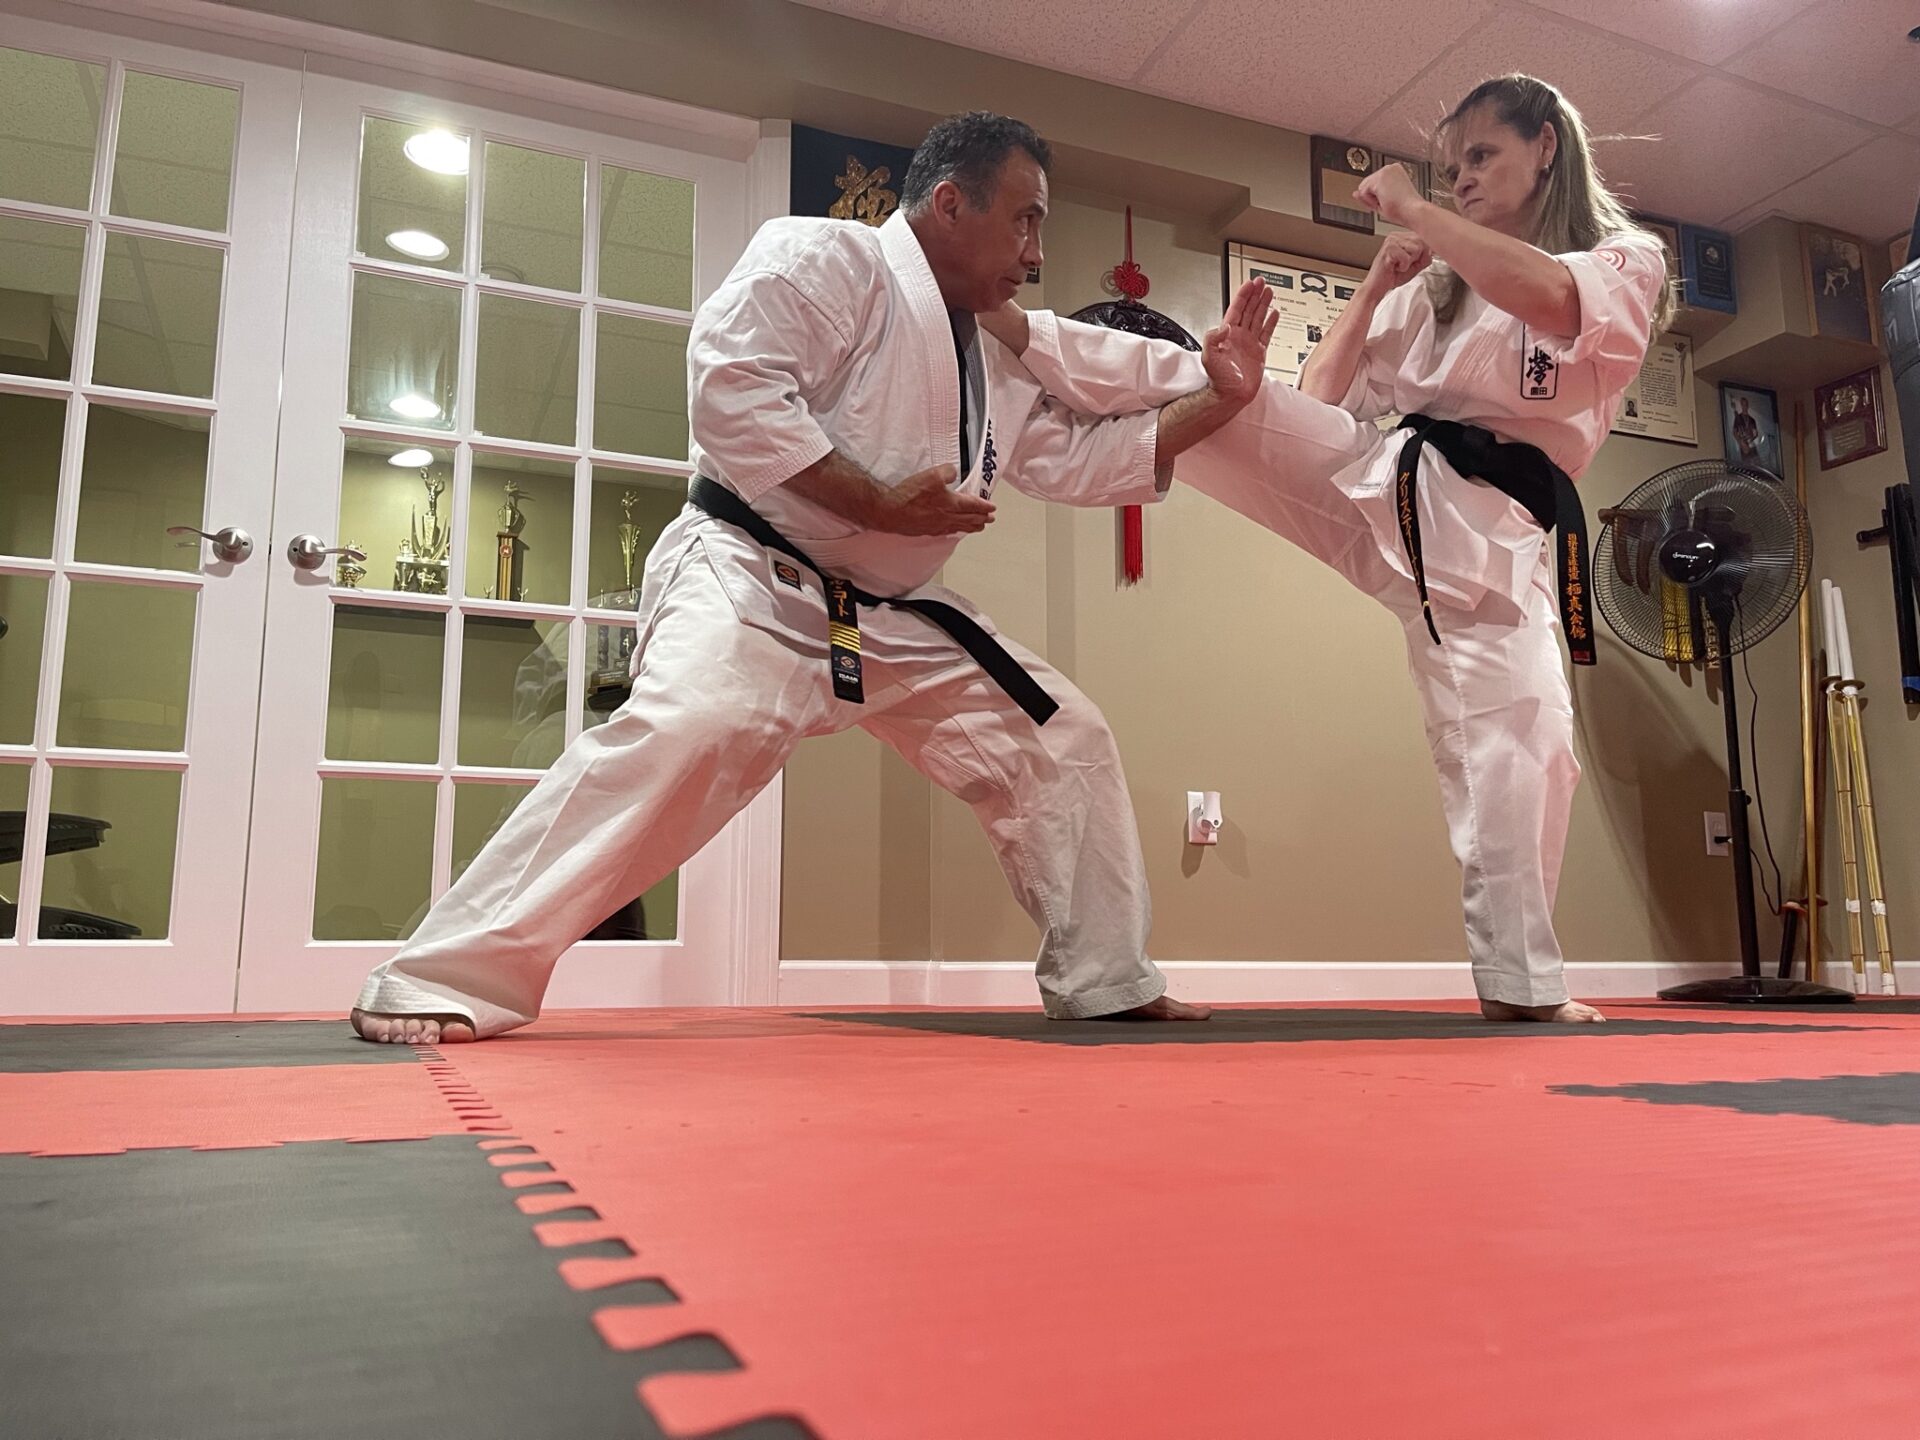 Two people practicing martial arts in a gym.